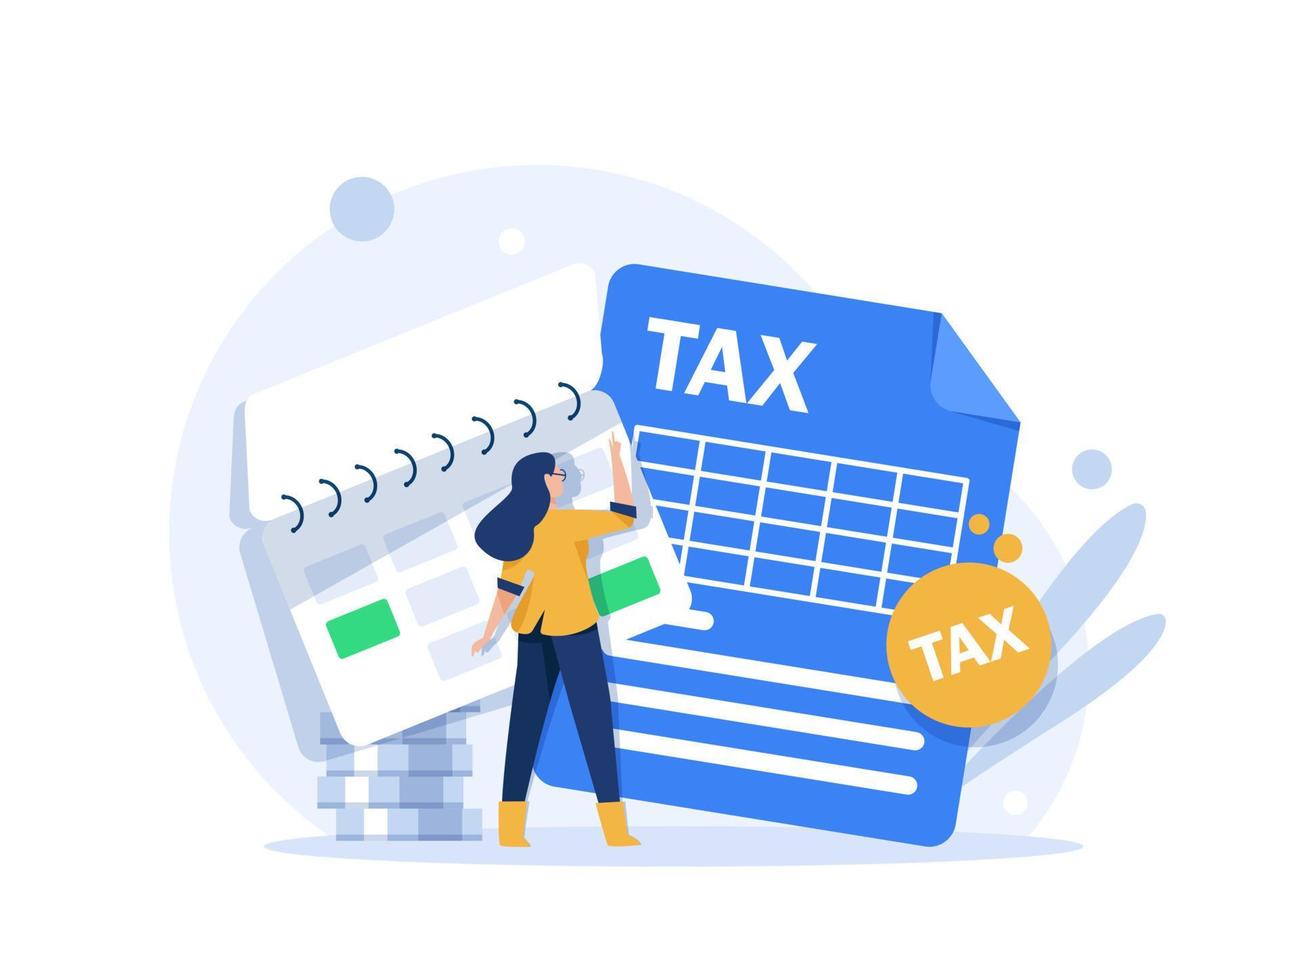 Tax deduction. Concept of tax return,optimization, duty, financial accounting vector